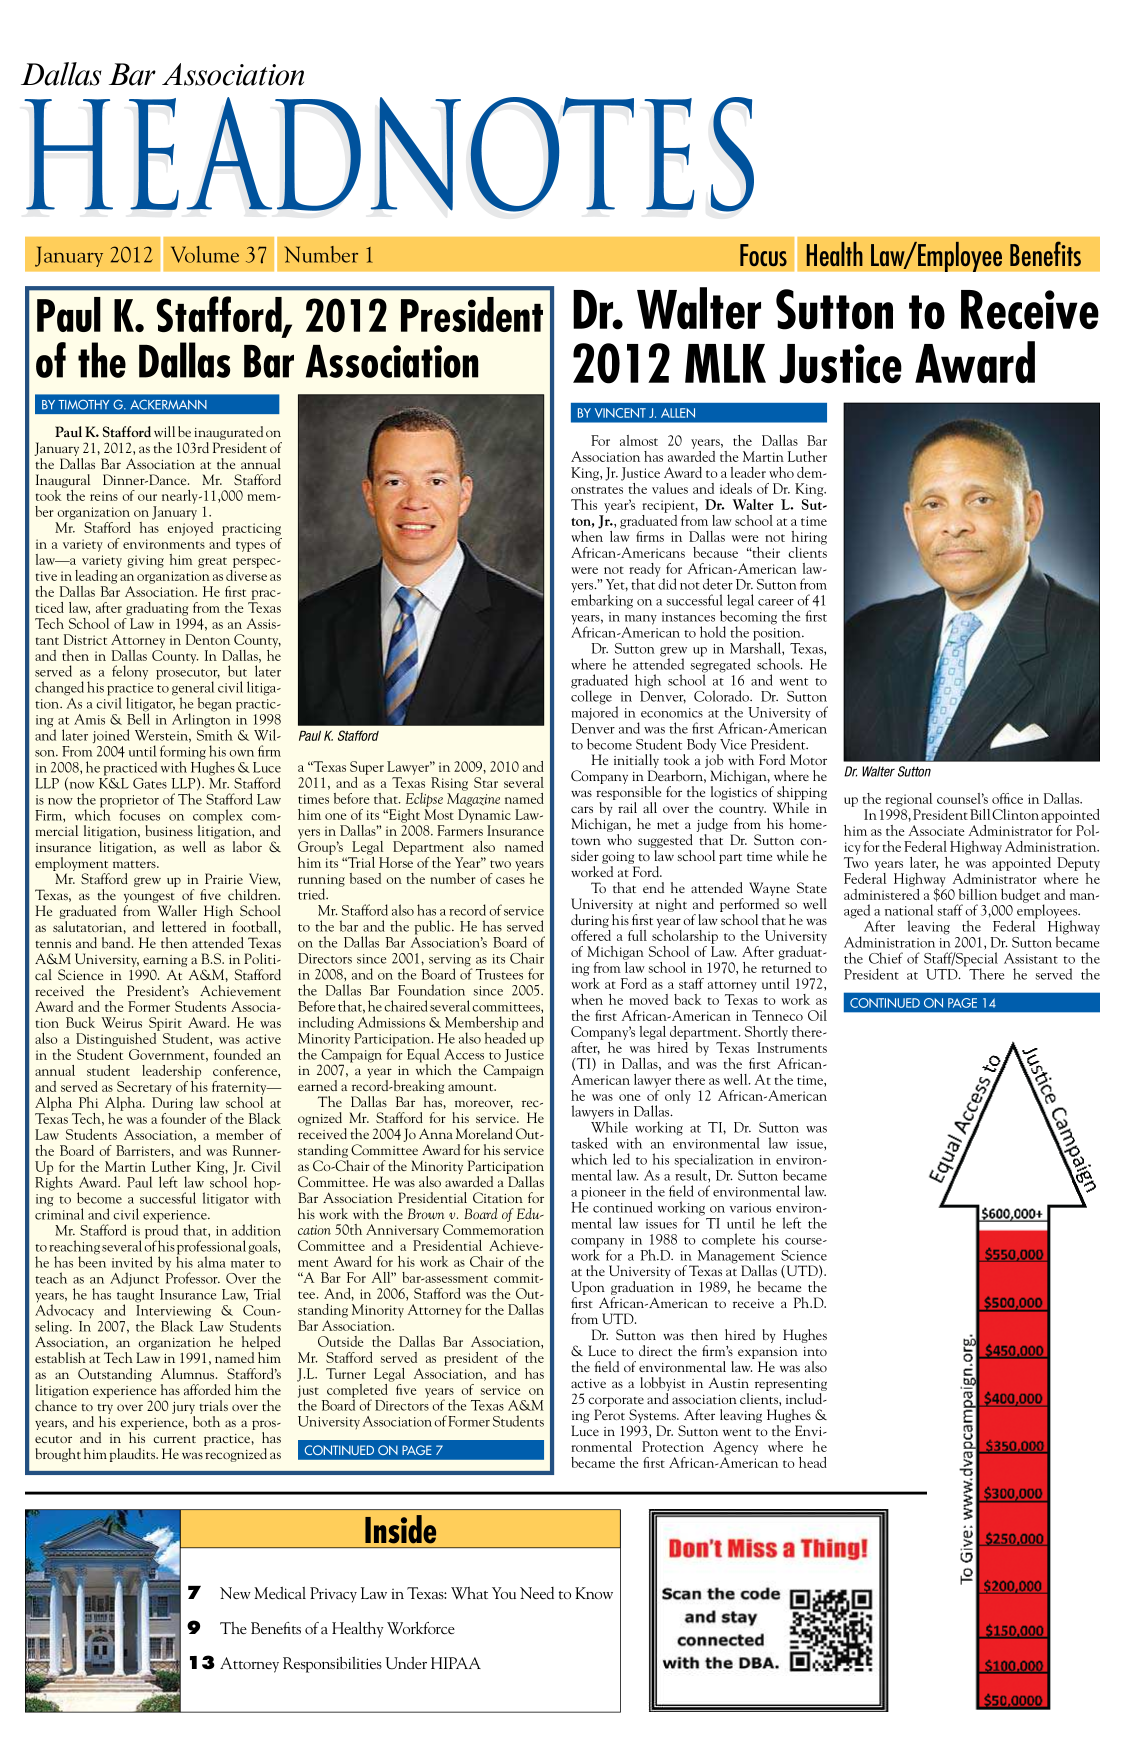 handle is hein.barjournals/hdba0037 and id is 1 raw text is: 



Dallas Bar Association



     HEA


Paul K. Stafford, 2012 President


of the Dallas Bar Association


Dr. Walter Sutton to Receive


2012 MLK Justice Award


   Paul K. Stafford will be inaugurated on
January 21, 2012, as the 103rd President of
the Dallas Bar Association at the annual
Inaugural Dinner-Dance. Mr. Stafford
took the reins of our nearly- 11,000 mem-
ber organization on January 1.
   Mr. Stafford has enjoyed practicing
in a variety of environments and types of
law-a variety giving him great perspec-
tive in leading an organization as diverse as
the Dallas Bar Association. He first prac-
ticed law, after graduating from the Texas
Tech School of Law in 1994, as an Assis-
tant District Attorney in Denton County,
and then in Dallas County. In Dallas, he
served as a felony prosecutor, but later
changed his practice to general civil litiga-
tion. As a civil litigator, he began practic-
ing at Amis & Bell in Arlington in 1998
and later joined Werstein, Smith & Wil-
son. From 2004 until forming his own firm
in 2008, he practiced with Hughes & Luce
LLP (now K&L Gates LLP). Mr. Stafford
is now the proprietor of The Stafford Law
Firm, which focuses on complex com-
mercial litigation, business litigation, and
insurance litigation, as well as labor &
employment matters.
   Mr. Stafford grew up in Prairie View,
Texas, as the youngest of five children.
He graduated from Waller High School
as salutatorian, and lettered in football,
tennis and band. He then attended Texas
A&M University, earning a B.S. in Politi-
cal Science in 1990. At A&M, Stafford
received the President's Achievement
Award and the Former Students Associa-
tion Buck Weirus Spirit Award. He was
also a Distinguished Student, was active
in the Student Government, founded an
annual student leadership conference,
and served as Secretary of his fraternity-
Alpha Phi Alpha. During law school at
Texas Tech, he was a founder of the Black
Law Students Association, a member of
the Board of Barristers, and was Runner-
Up for the Martin Luther King, Jr. Civil
Rights Award. Paul left law school hop-
ing to become a successful litigator with
criminal and civil experience.
   Mr. Stafford is proud that, in addition
to reaching several of his professional goals,
he has been invited by his alma mater to
teach as an Adjunct Professor. Over the
years, he has taught Insurance Law, Trial
Advocacy and Interviewing & Coun-
seling. In 2007, the Black Law Students
Association, an organization he helped
establish at Tech Law in 1991, named him
as an Outstanding Alumnus. Stafford's
litigation experience has afforded him the
chance to try over 200 jury trials over the
years, and his experience, both as a pros-
ecutor and in his current practice, has
brought him plaudits. He was recognized as


Paul K Stafford


a Texas Super Lawyer in 2009, 2010 and
2011, and as a Texas Rising Star several
times before that. Eclipse Magazine named
him one of its Eight Most Dynamic Law-
yers in Dallas in 2008. Farmers Insurance
Group's Legal Department also named
him its Trial Horse of the Year two years
running based on the number of cases he
tried.
   Mr. Stafford also has a record of service
to the bar and the public. He has served
on the Dallas Bar Association's Board of
Directors since 2001, serving as its Chair
in 2008, and on the Board of Trustees for
the Dallas Bar Foundation since 2005.
Before that, he chaired several committees,
including Admissions & Membership and
Minority Participation. He also headed up
the Campaign for Equal Access to Justice
in 2007, a year in which the Campaign
earned a record-breaking amount.
   The Dallas Bar has, moreover, rec-
ognized Mr. Stafford for his service. He
received the 2004 Jo Anna Moreland Out-
standing Committee Award for his service
as Co-Chair of the Minority Participation
Committee. He was also awarded a Dallas
Bar Association Presidential Citation for
his work with the Brown v. Board of Edu-
cation 50th Anniversary Commemoration
Committee and a Presidential Achieve-
ment Award for his work as Chair of the
A Bar For All bar-assessment commit-
tee. And, in 2006, Stafford was the Out-
standing Minority Attorney for the Dallas
Bar Association.
   Outside the Dallas Bar Association,
Mr. Stafford served as president of the
J.L. Turner Legal Association, and has
just completed five years of service on
the Board of Directors of the Texas A&M
University Association of Former Students


   For almost 20 years, the Dallas Bar
Association has awarded the Martin Luther
King, Jr. Justice Award to a leader who dem-
onstrates the values and ideals of Dr. King.
This year's recipient, Dr. Walter L. Sut-
ton, Jr., graduated from law school at a time
when law firms in Dallas were not hiring
African-Americans because their clients
were not ready for African-American law-
yers. Yet, that did not deter Dr. Sutton from
embarking on a successful legal career of 41
years, in many instances becoming the first
African-American to hold the position.
   Dr. Sutton grew up in Marshall, Texas,
where he attended segregated schools. He
graduated high school at 16 and went to
college in Denver, Colorado. Dr. Sutton
majored in economics at the University of
Denver and was the first African-American
to become Student Body Vice President.
   He initially took a job with Ford Motor
Company in Dearborn, Michigan, where he
was responsible for the logistics of shipping
cars by rail all over the country. While in
Michigan, he met a judge from his home-
town who suggested that Dr. Sutton con-
sider going to law school part time while he
worked at Ford.
   To that end he attended Wayne State
University at night and performed so well
during his first year of law school that he was
offered a full scholarship to the University
of Michigan School of Law. After graduat-
ing from law school in 1970, he returned to
work at Ford as a staff attorney until 1972,
when he moved back to Texas to work as
the first African-American in Tenneco Oil
Company's legal department. Shortly there-
after, he was hired by Texas Instruments
(TI) in Dallas, and was the first African-
American lawyer there as well. At the time,
he was one of only 12 African-American
lawyers in Dallas.
   While working at TI, Dr. Sutton was
tasked with an environmental law issue,
which led to his specialization in environ-
mental law. As a result, Dr. Sutton became
a pioneer in the field of environmental law.
He continued working on various environ-
mental law issues for TI until he left the
company in 1988 to complete his course-
work for a Ph.D. in Management Science
at the University of Texas at Dallas (UTD).
Upon graduation in 1989, he became the
first African-American to receive a Ph.D.
from UTD.
   Dr. Sutton was then hired by Hughes
& Luce to direct the firm's expansion into
the field of environmental law. He was also
active as a lobbyist in Austin representing
25 corporate and association clients, includ-
ing Perot Systems. After leaving Hughes &
Luce in 1993, Dr. Sutton went to the Envi-
ronmental Protection Agency where he
became the first African-American to head


Dr. walter Sutton


up the regional counsel's office in Dallas.
   In 1998, President Bill Clinton appointed
him as the Associate Administrator for Pol-
icy for the Federal Highway Administration.
Two years later, he was appointed Deputy
Federal Highway Administrator where he
administered a $60 billion budget and man-
aged a national staff of 3,000 employees.
   After leaving   the Federal Highway
Administration in 2001, Dr. Sutton became
the Chief of Staff/Special Assistant to the
President at UTD. There he served the


7 New Medical Privacy Law in Texas: What You Need to Know


9 The Benefits of a Healthy Workforce

1 3 Attorney Responsibilities Under HIPAA


U                                                                                                            U


  Donl       uss      Thing!

Scan the code
    and stay
  connected
with the DBA.0                A


I


I


ES


